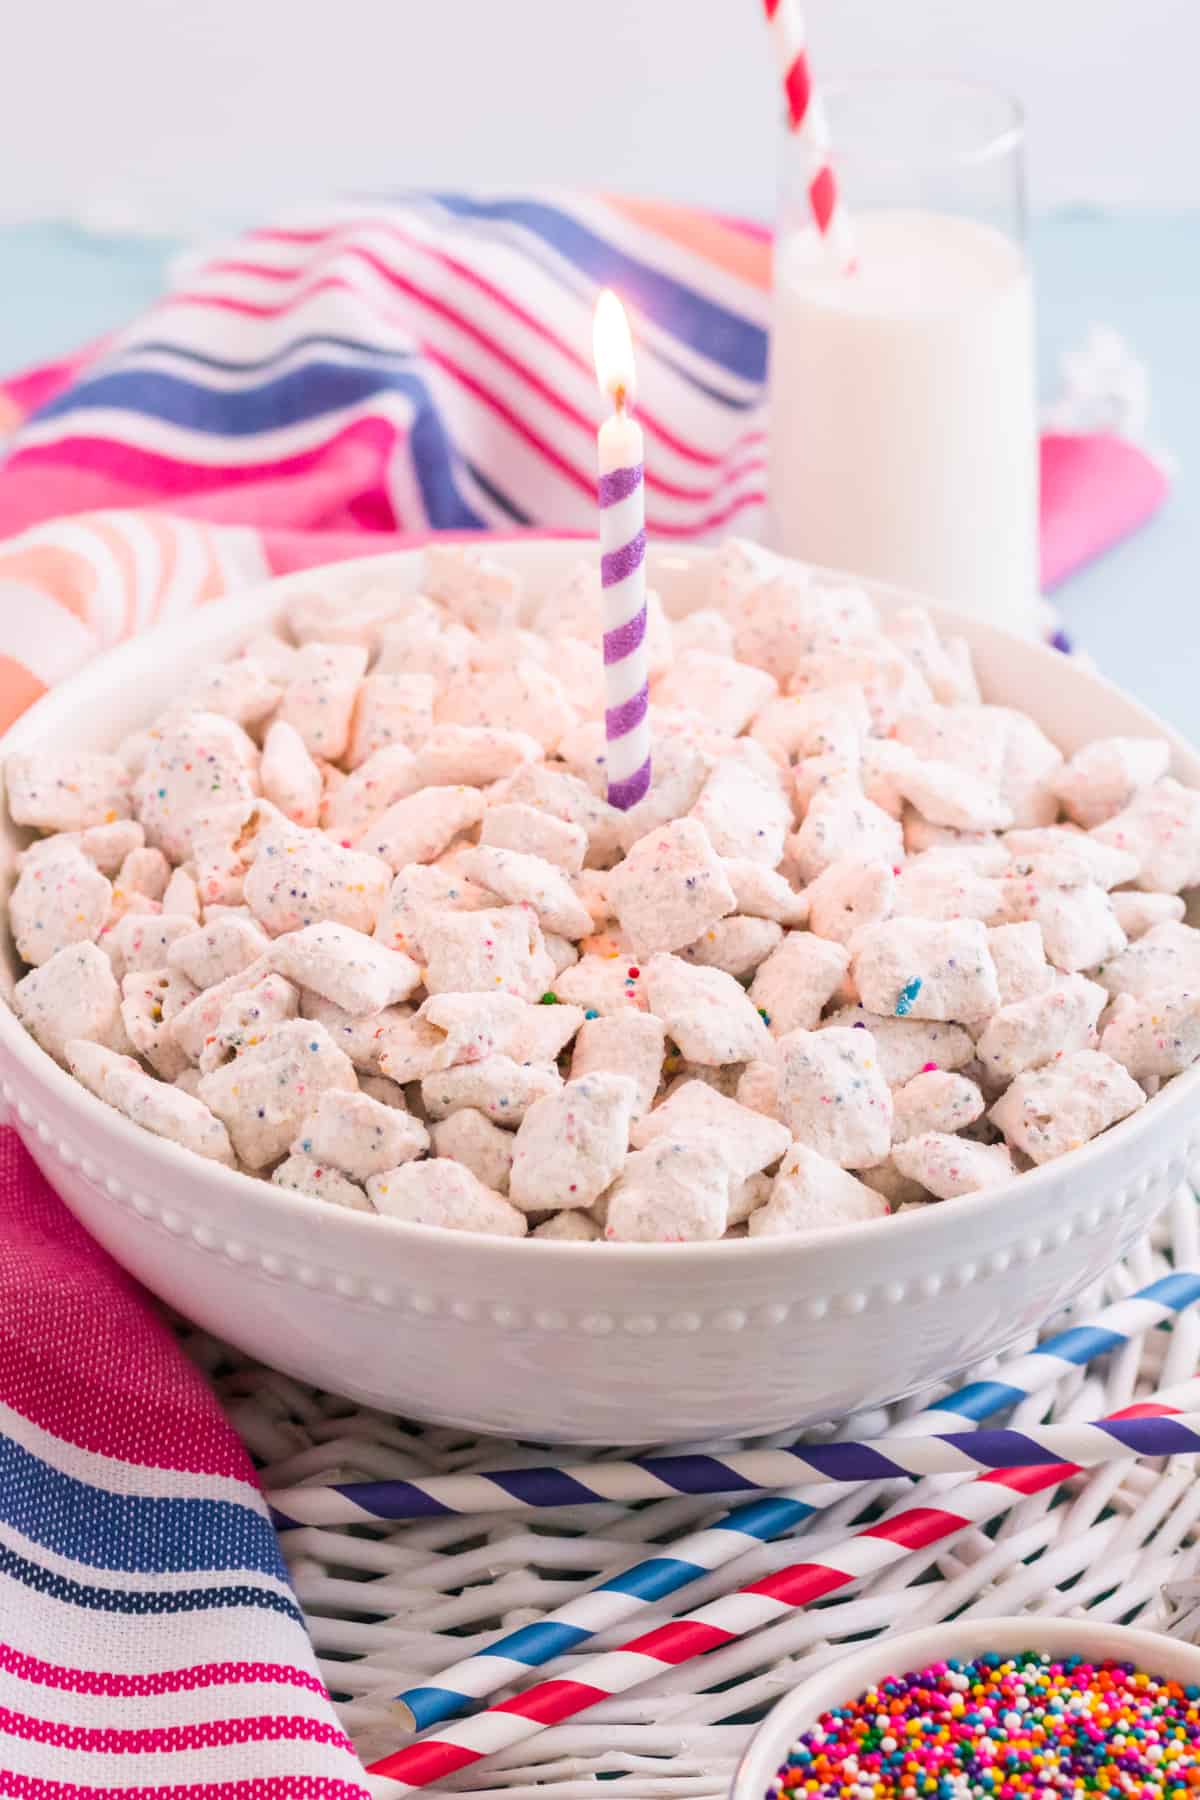 Large white bowl of funfetti puppy chow with purple birthday candle in the center and a glass of milk, colorful paper straws, sprinkles, and a colorful linen in background.